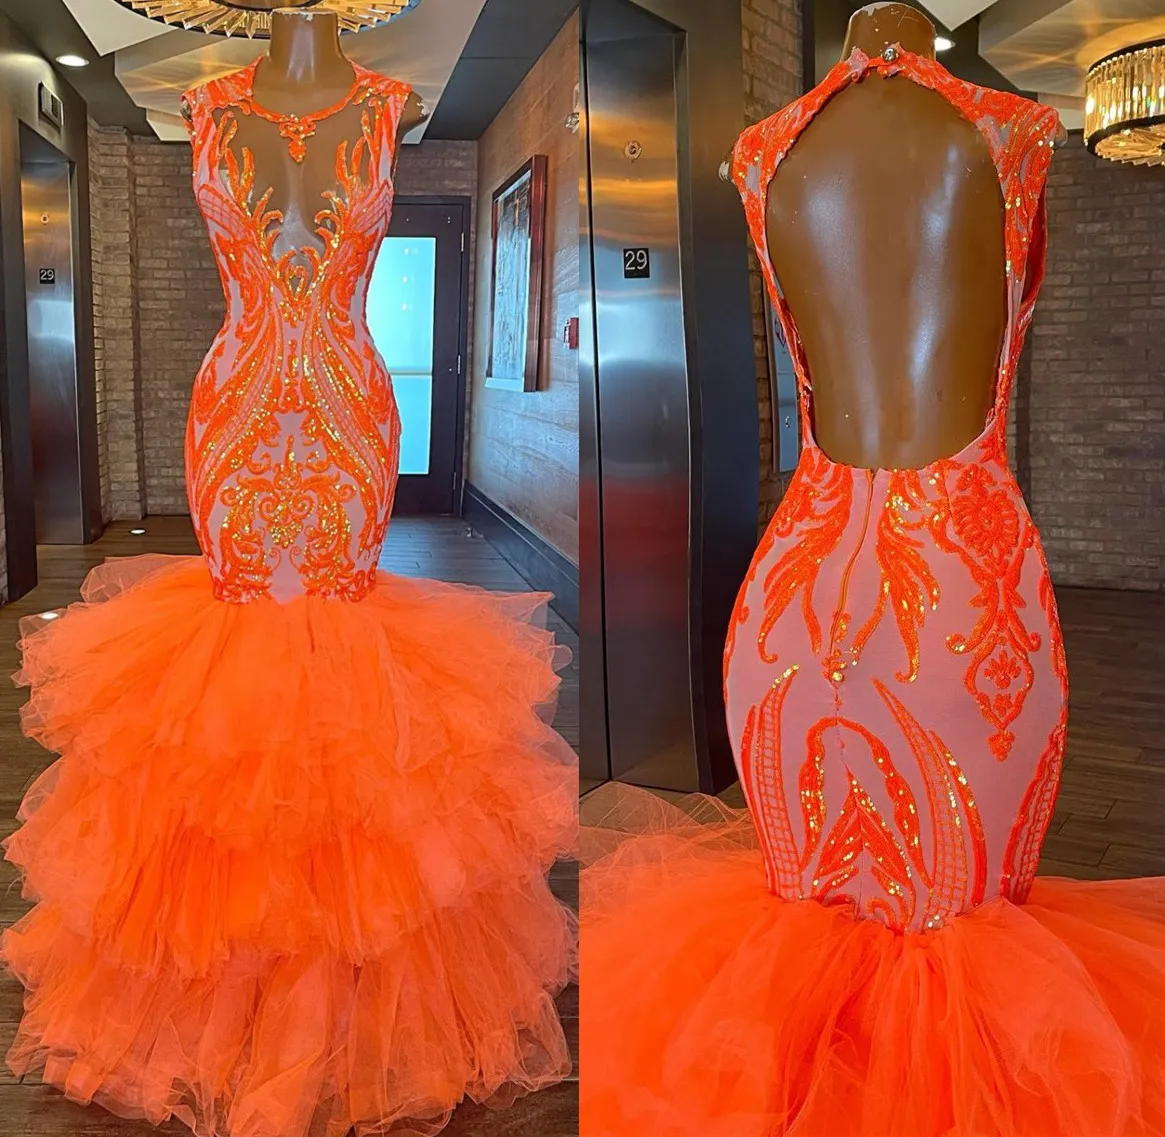 Orange Ebi Arabic Aso Mermaid Prom Dresses Sequined Lace Evening Formal Party Second Reception Birthday Engagement Bridesmaid Gowns Dress ZJ